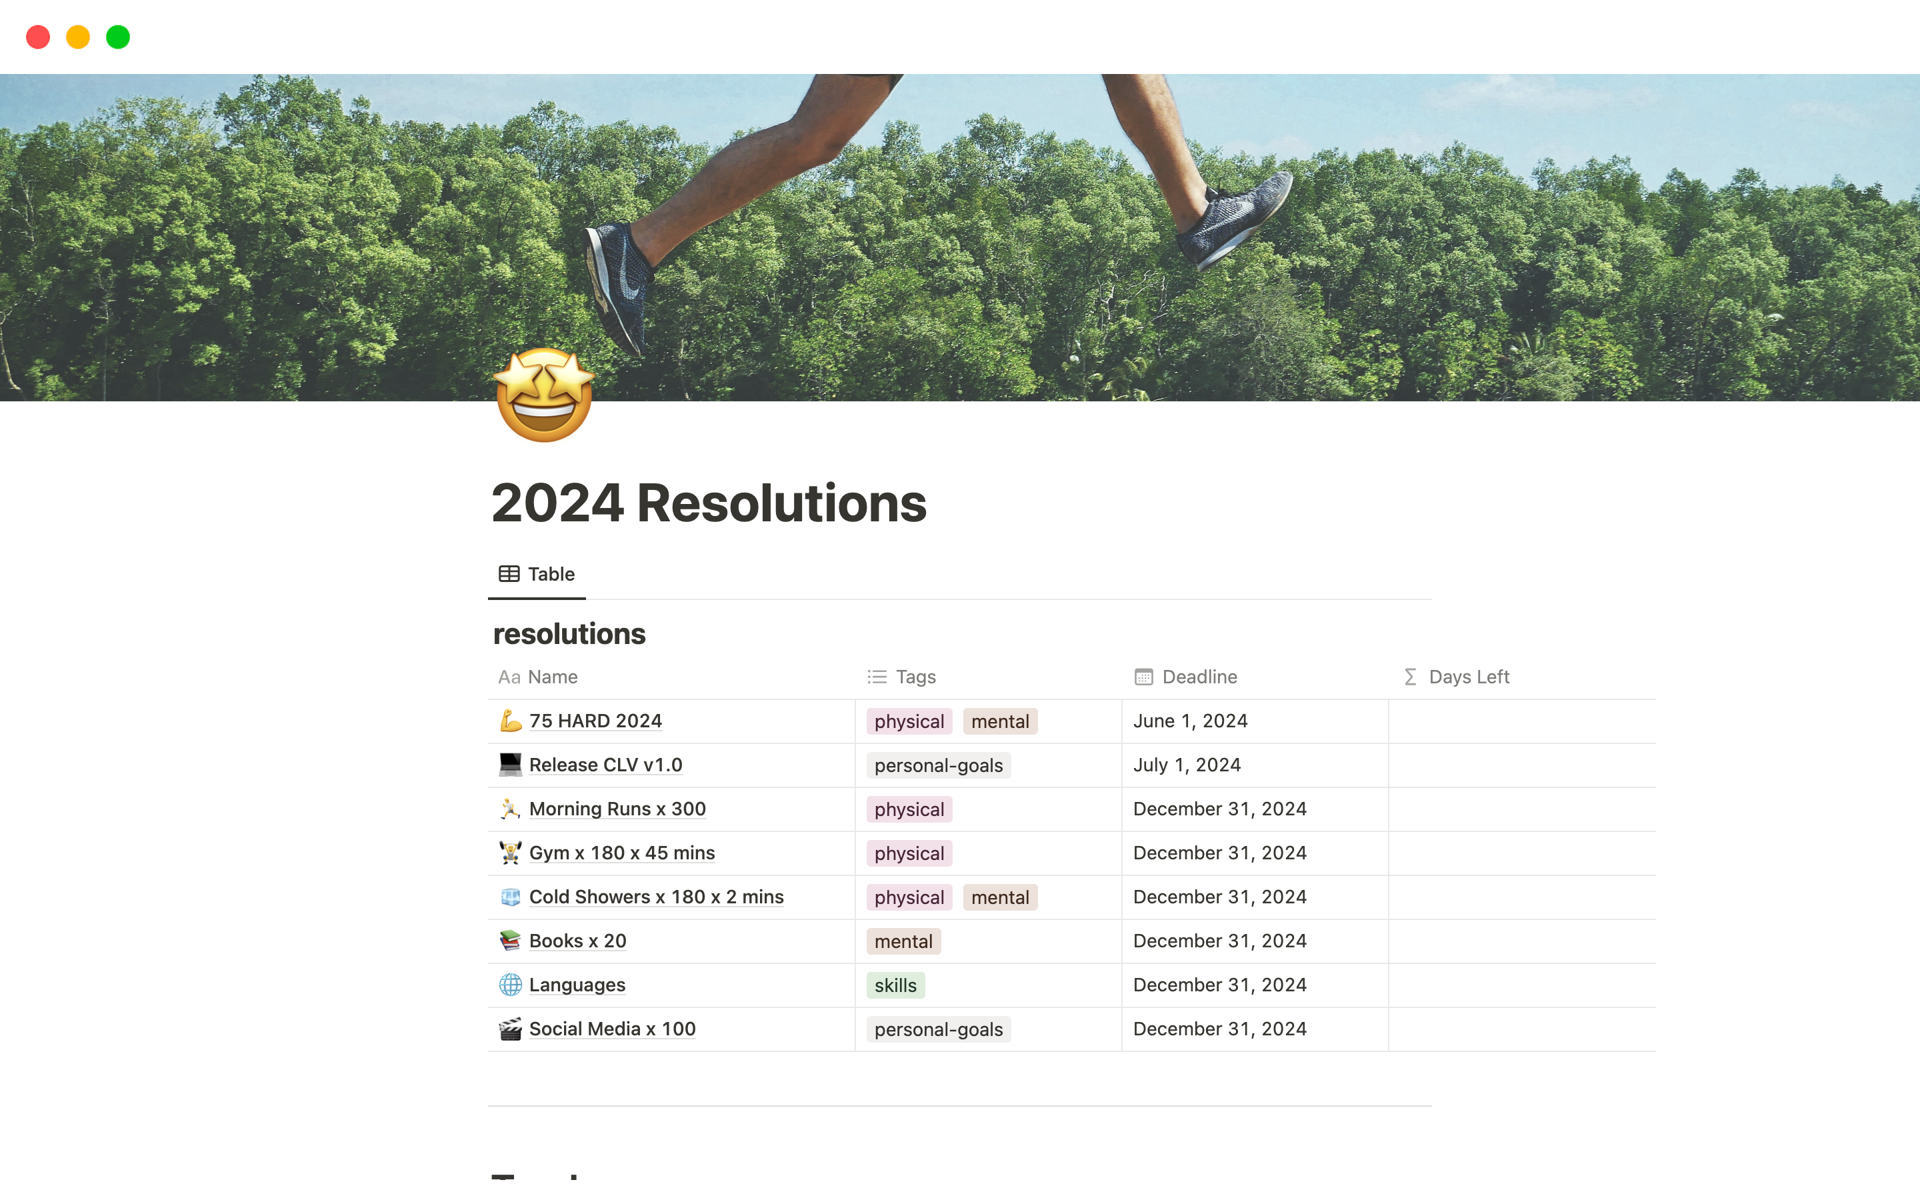 A database system that allows you to write down your resolutions of the new year and track the progress of them.